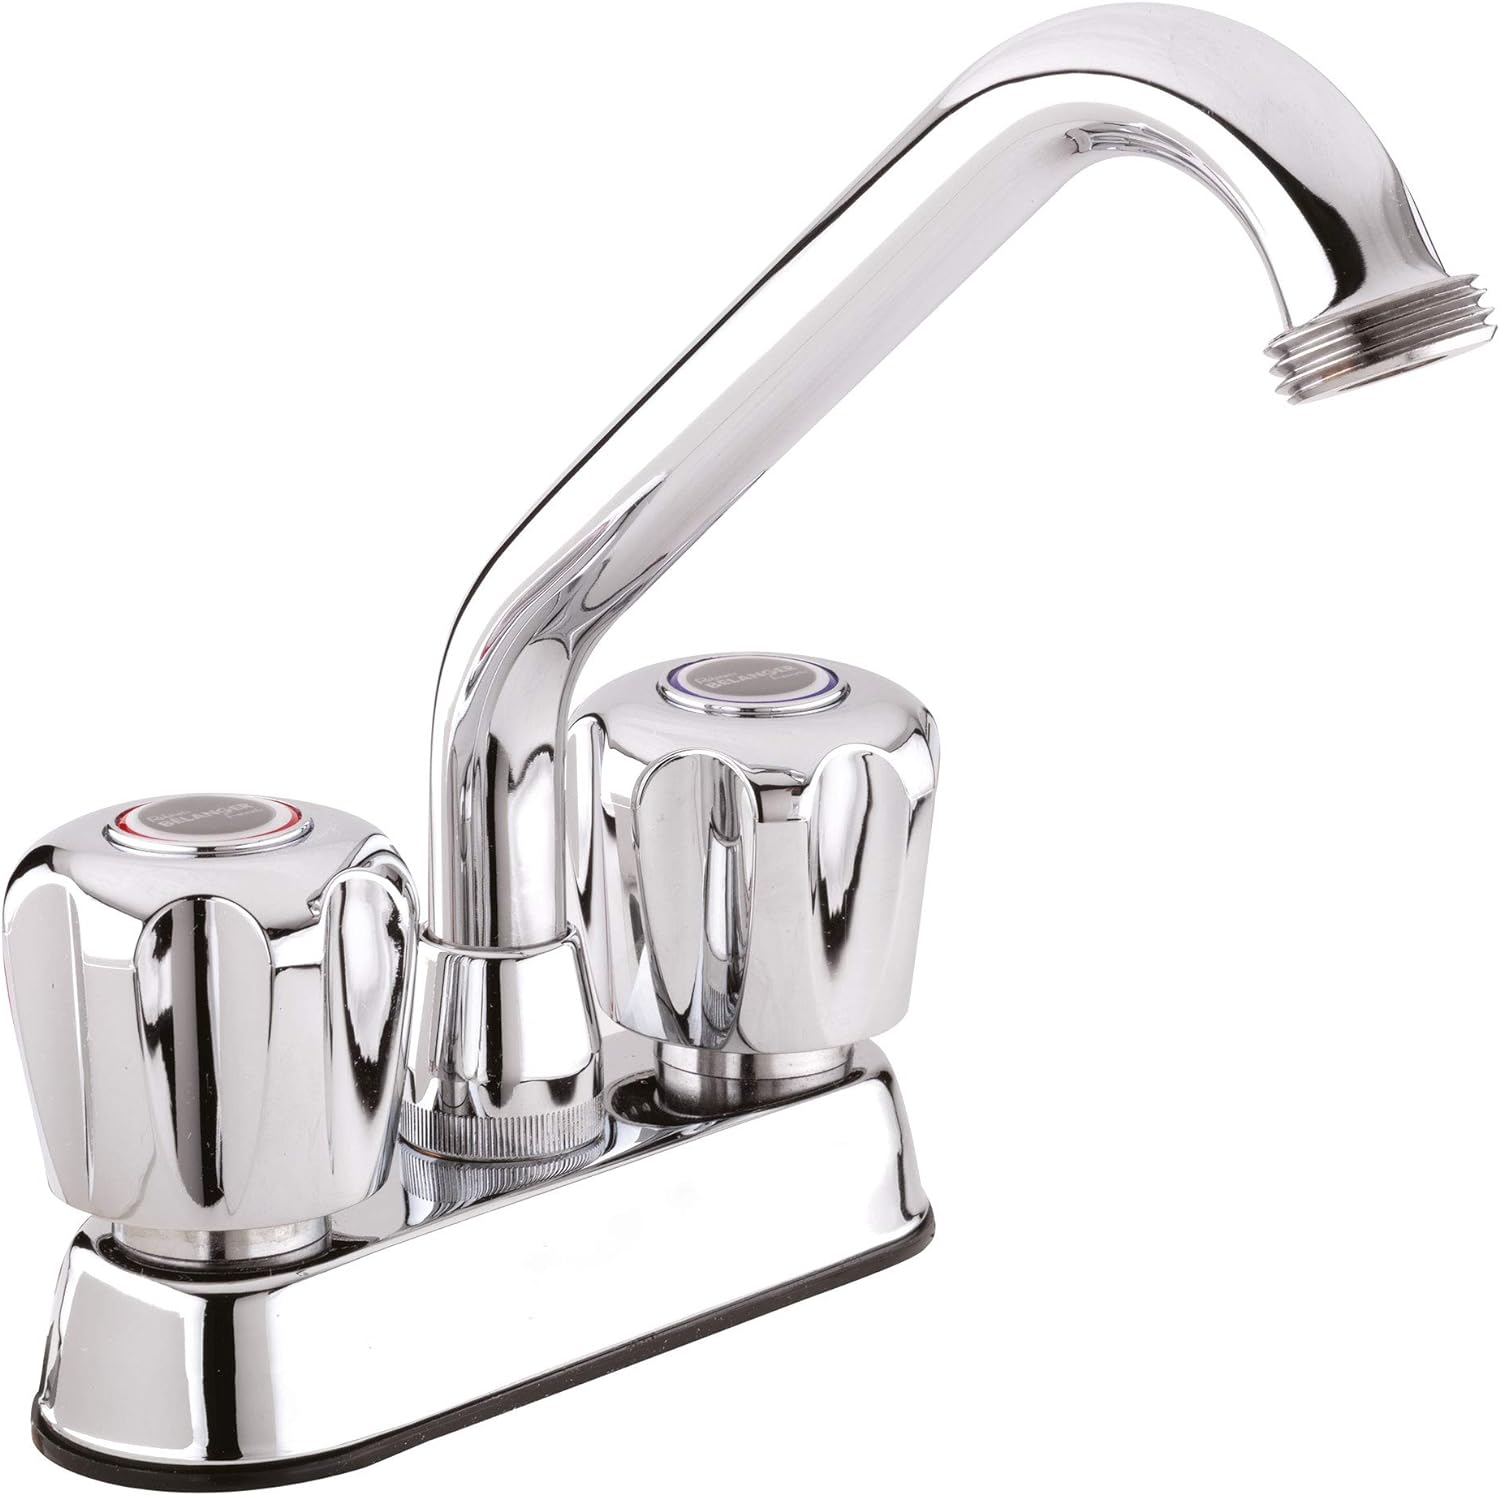 Plumb Pak 3040W Dual Handle Laundry Tub Faucet with Swivel Spout and Hose End for Utility Sink, Polished Chrome